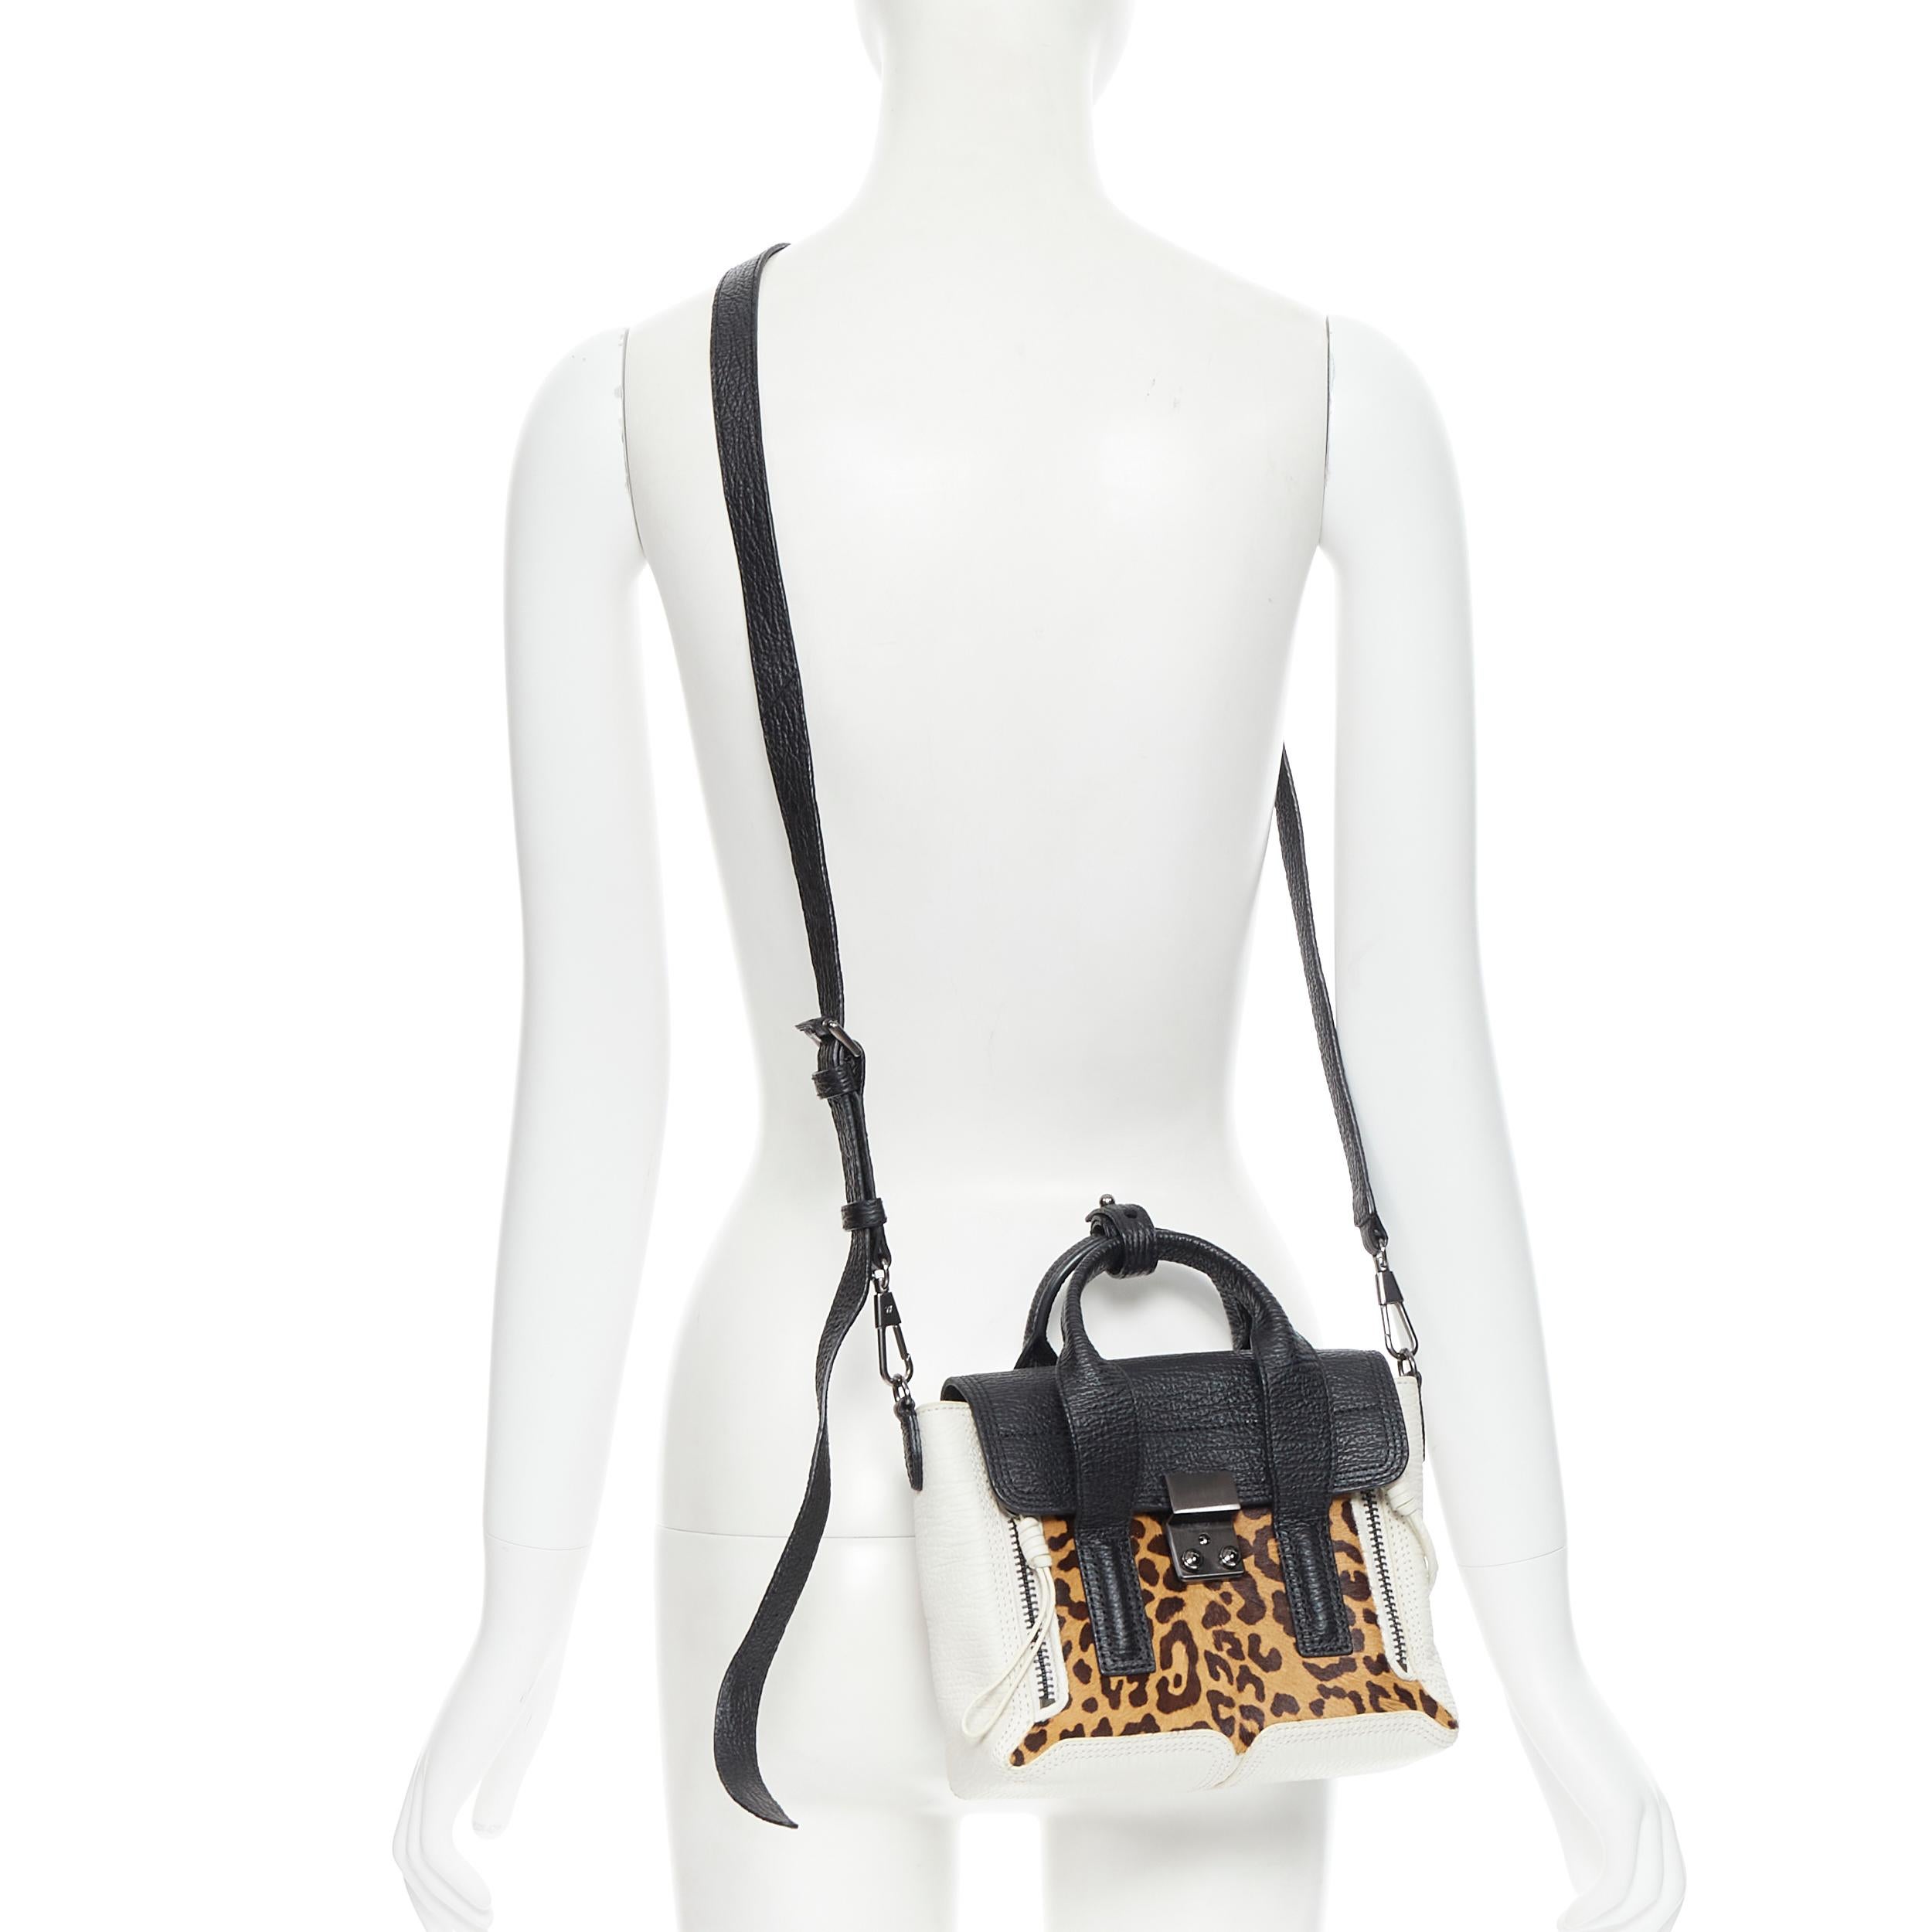 3.1 PHILLIP LIM Mini Pashli black white leopard leather crossbody satchel bag Reference: CAWG/A00164 
Brand: 3.1 Phillip Lim 
Designer: Phillip Lim 
Model: Mini Pashli 
Material: Leather 
Color: Brown 
Pattern: Leopard 
Closure: Clasp 
Extra Detail: